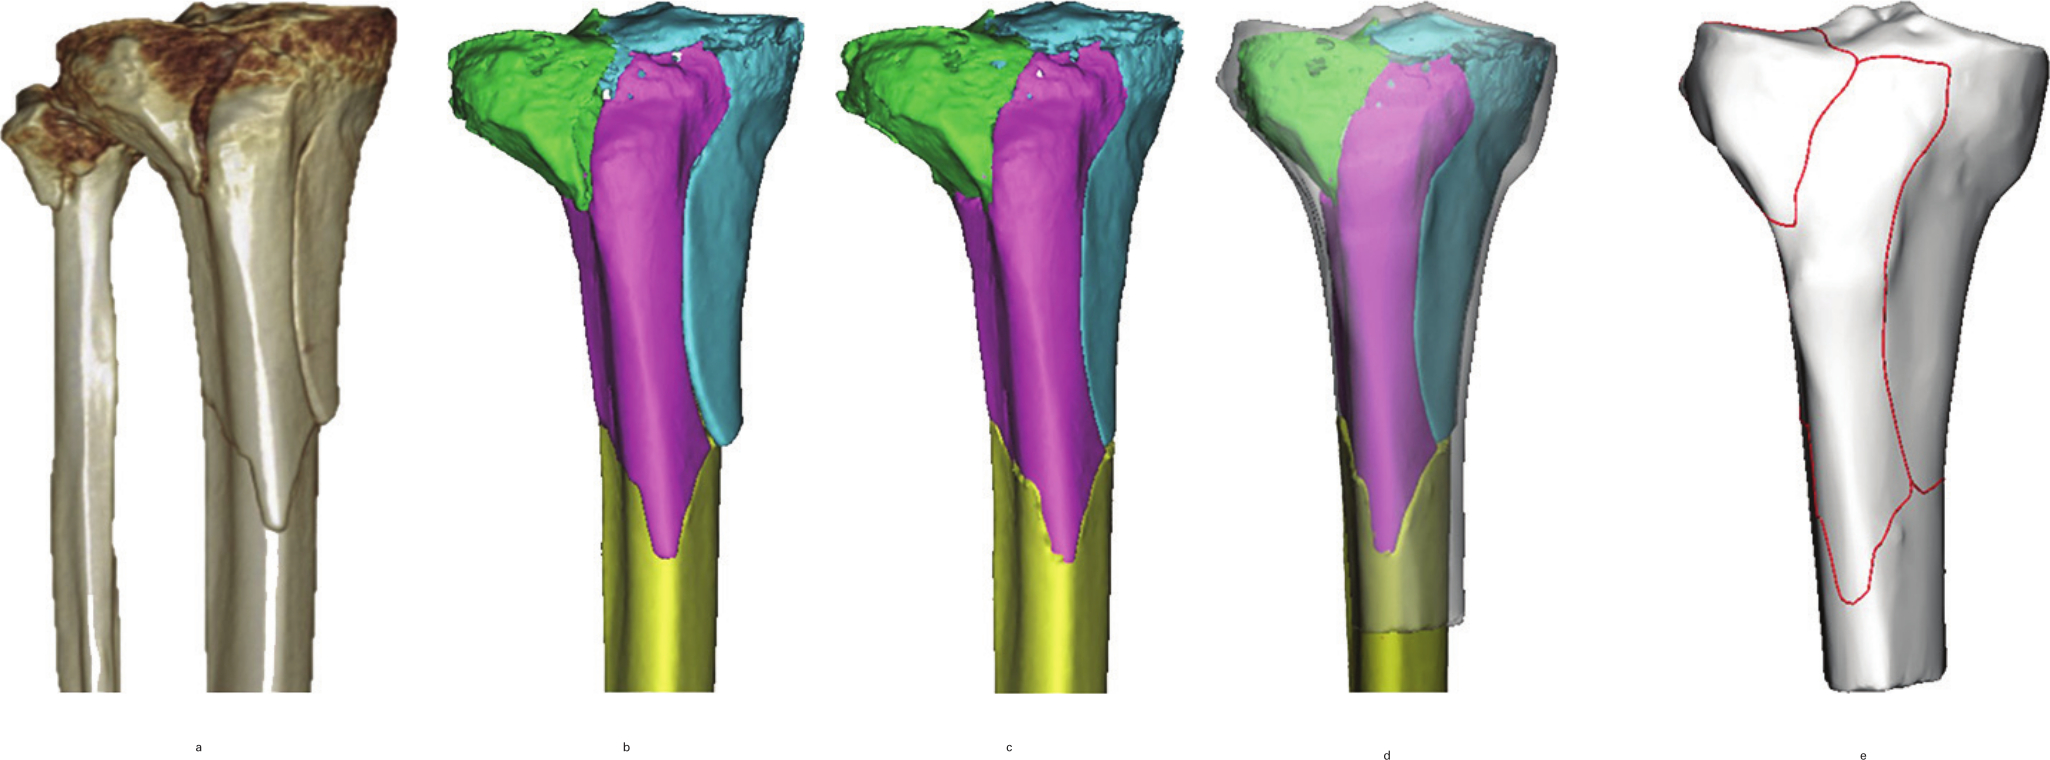 Fig. 1 
            The method used for the mapping of tibial plateau. a) 3D image of tibial plateau fracture in CT scans. b) Major fragments were reconstructed in Mimics (Materialise, Leuven, Belgium). c) Virtual reduction. d) Reduced fragments were adjusted to match the template in 3-matic 10.0 software (Materialise). e) Fracture lines were delineated on the template.
          